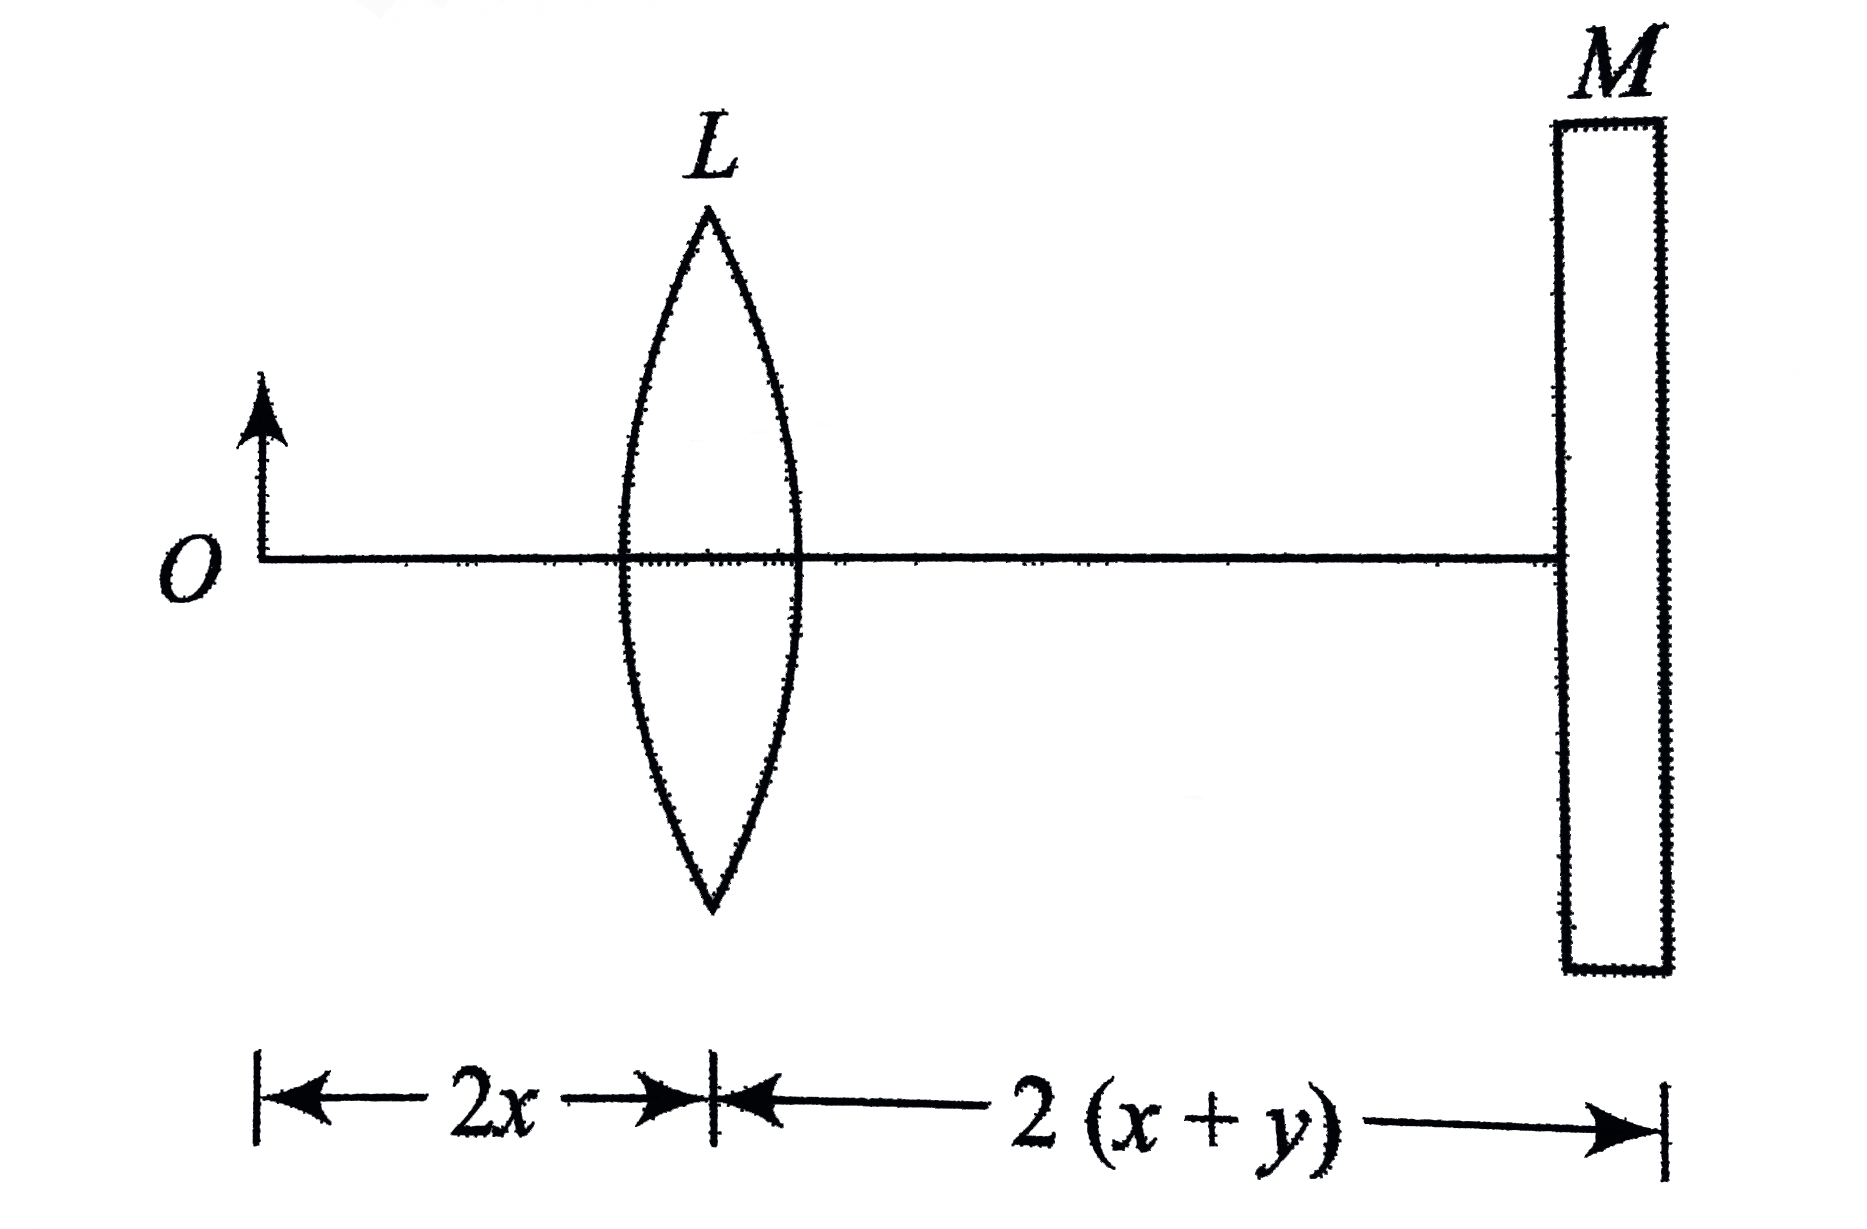 L is a lens such that a parallel beam of  light I ncident on it, after refraction, converges to a point at a distance x from it and M is a mirror such that a parallel lbeam of light incident on it, after reflection, converges to a point at a distance y from it. Now the lens L and mirror M are placed at a distan 2(x+y) from each other. An object of size 2 cm is kept infront of lens at a distance 2x from it. Find the nature, position , and size of the image that willl be seen by an observer looking toward the mirror through the lens.